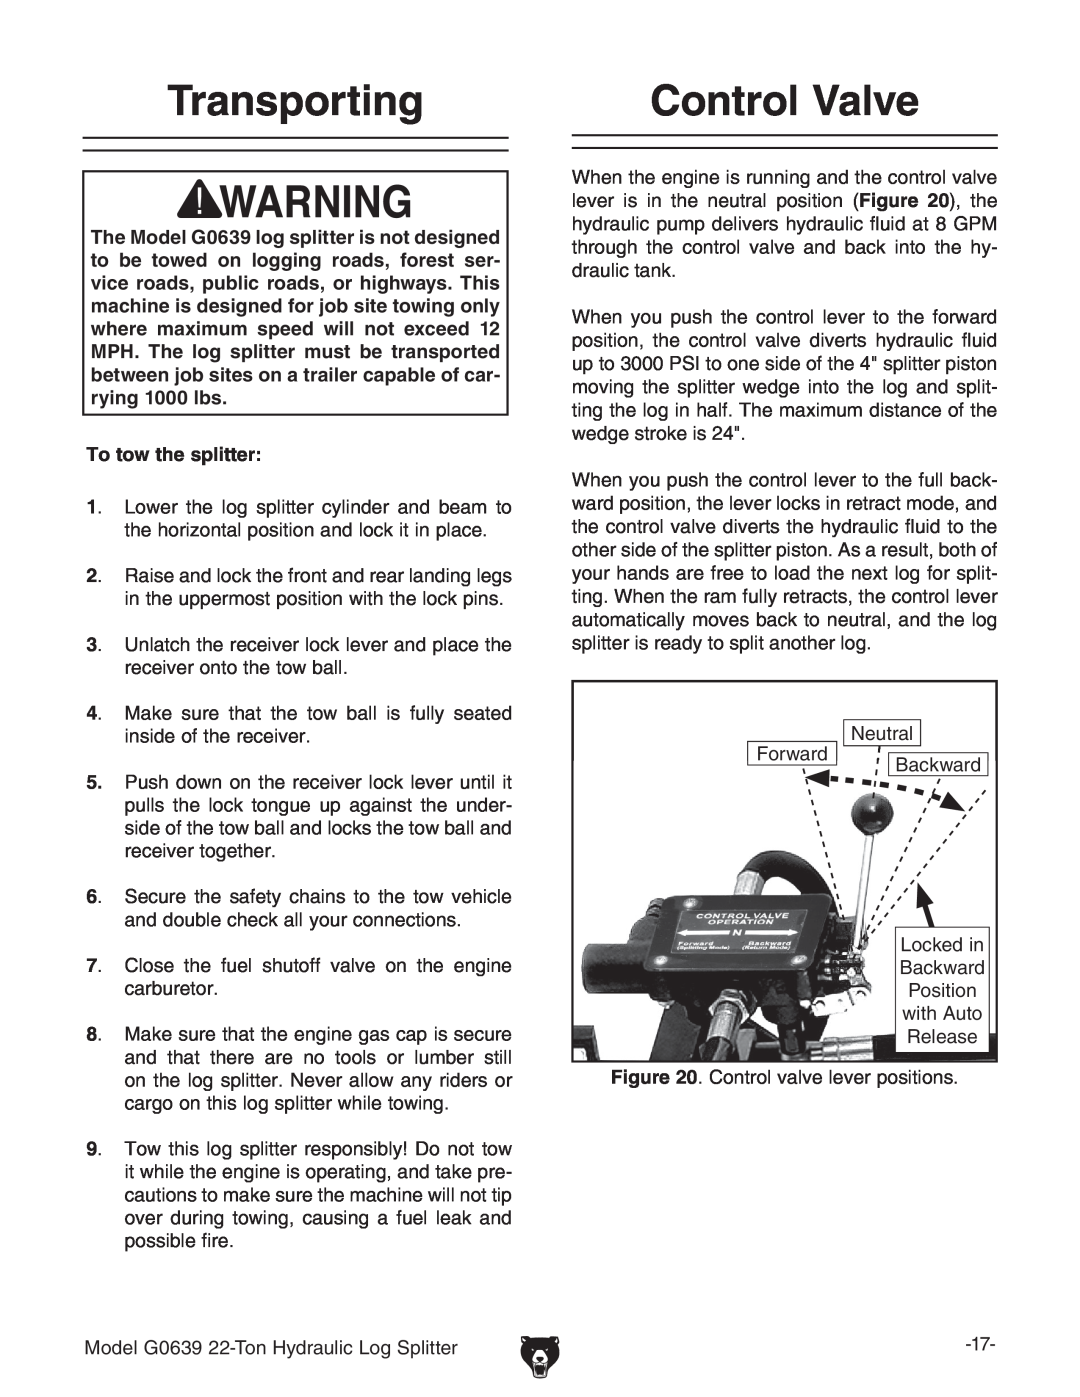 Grizzly G0639 owner manual Transporting, Control Valve, Backward 